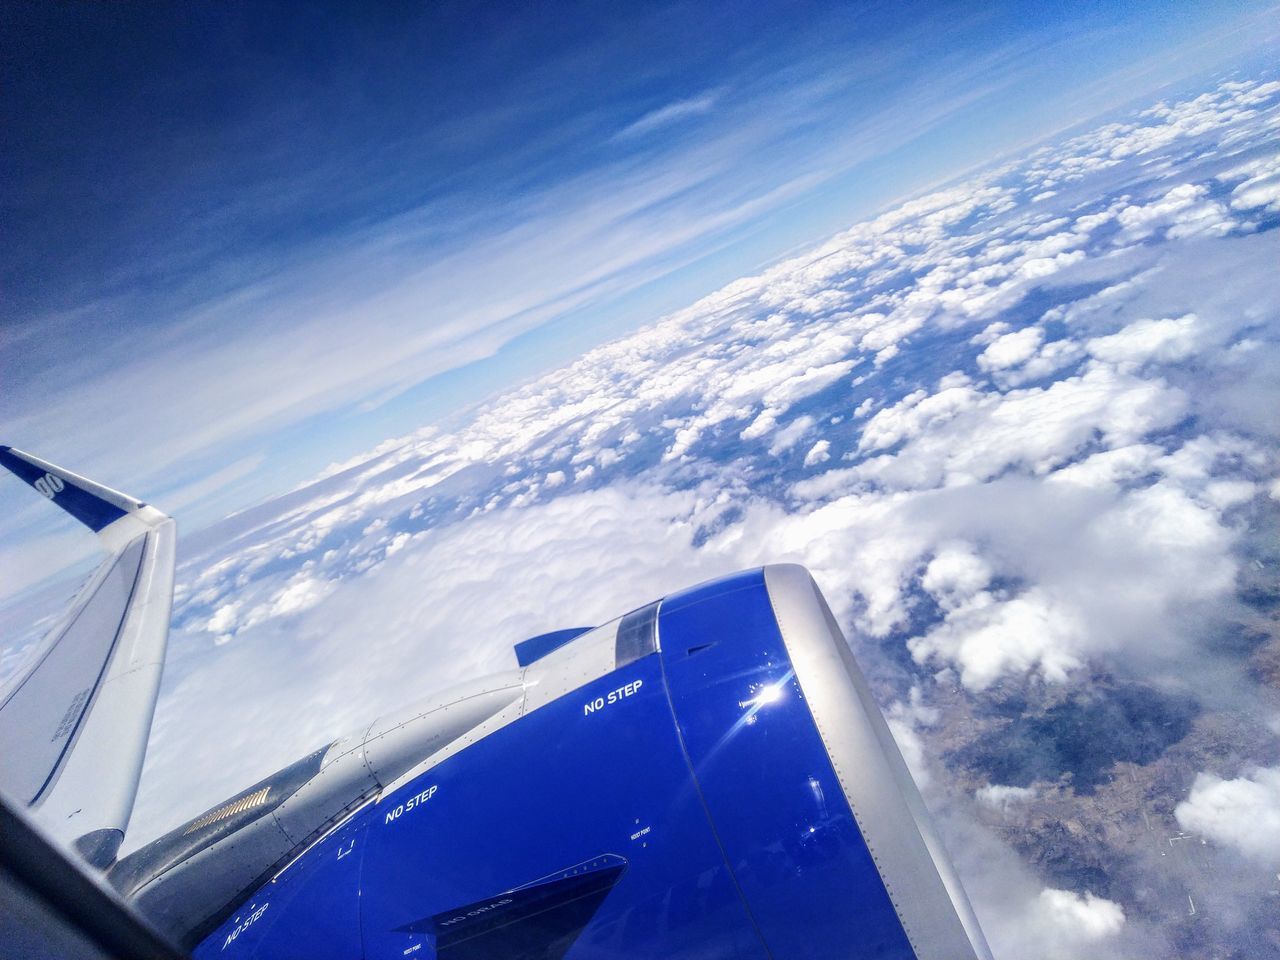 AERIAL VIEW OF AIRCRAFT WING OVER CLOUDS